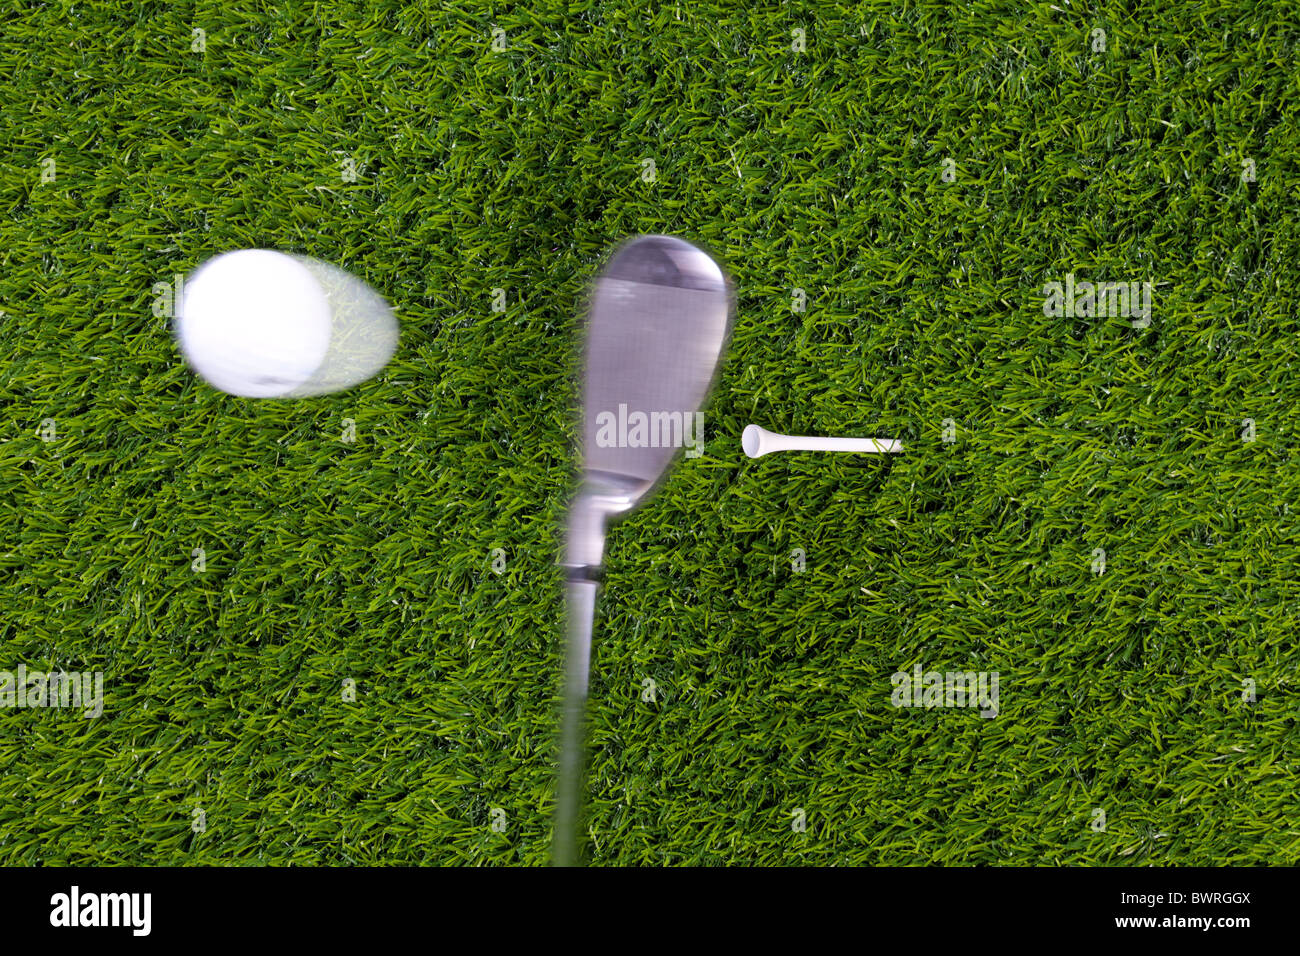 Photo of an iron hitting a golf ball off the tee with motion blur on the club and ball. Actual shot not photoshopped in. Stock Photo